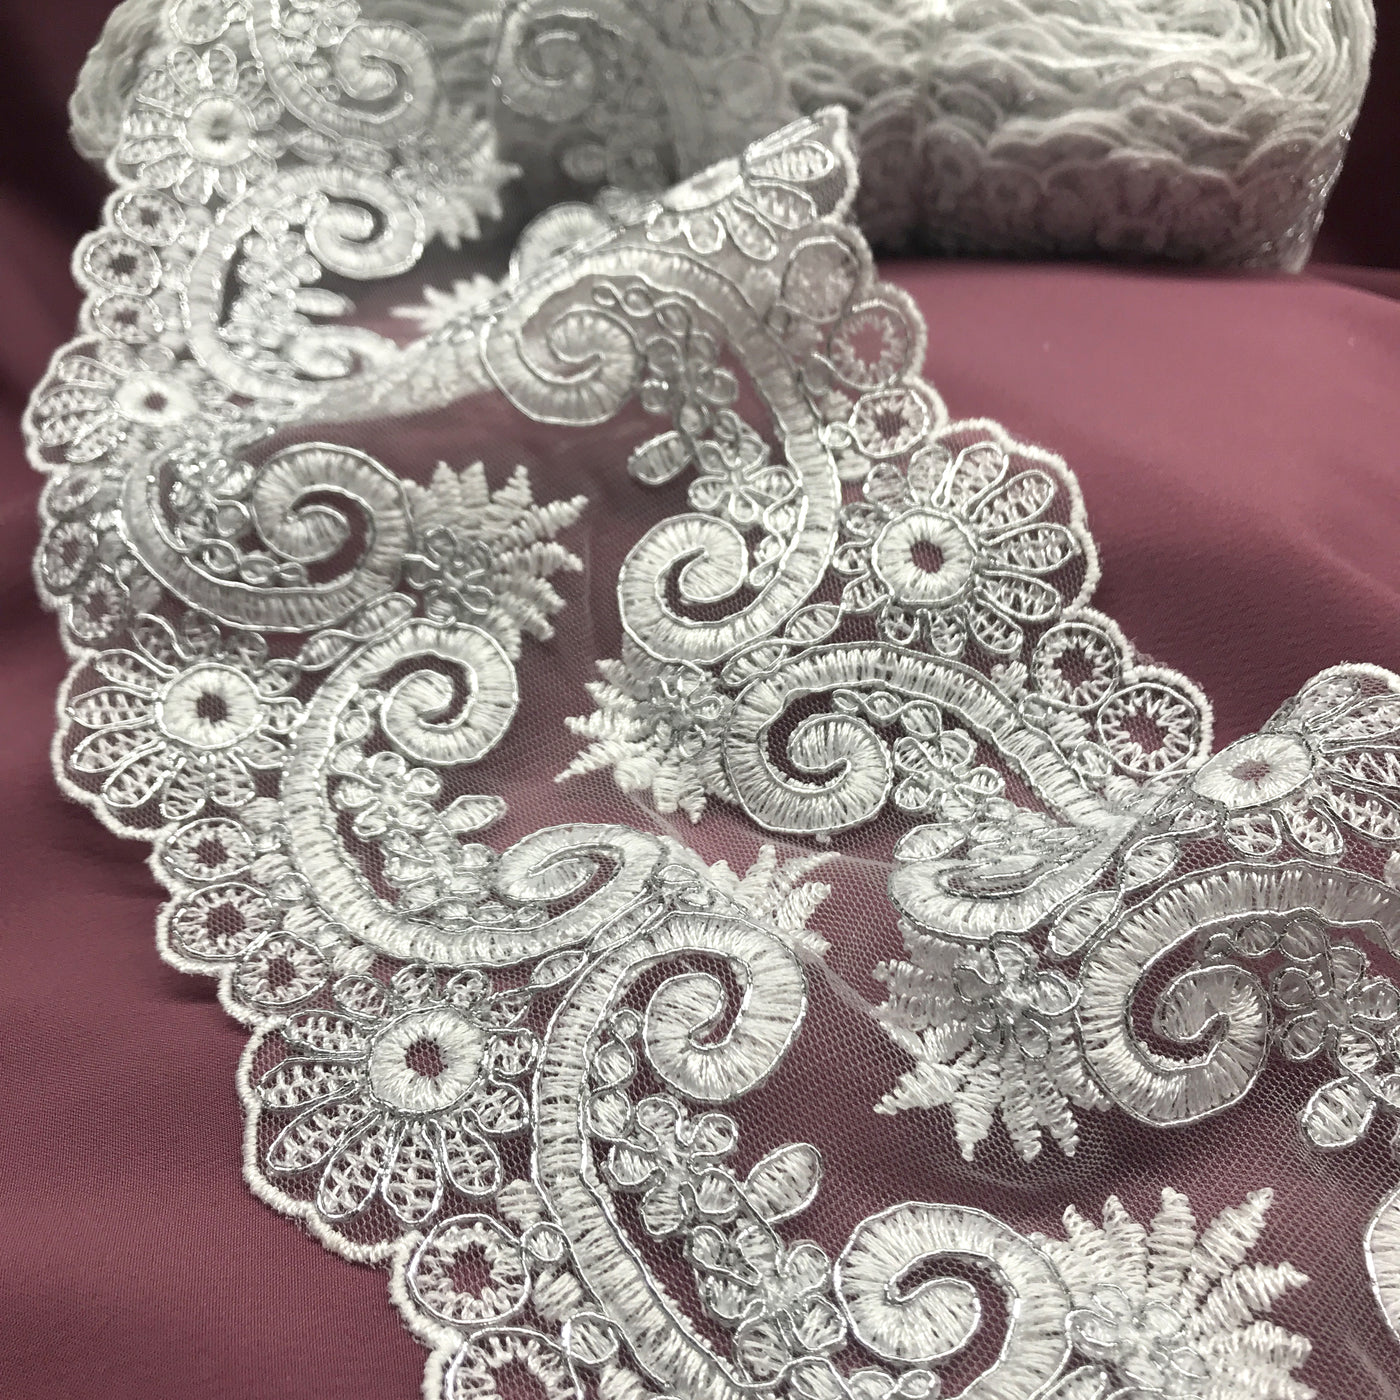 Corded & Embroidered White with Silver Double Sided Trimming on Mesh Net Lace. Lace Usa